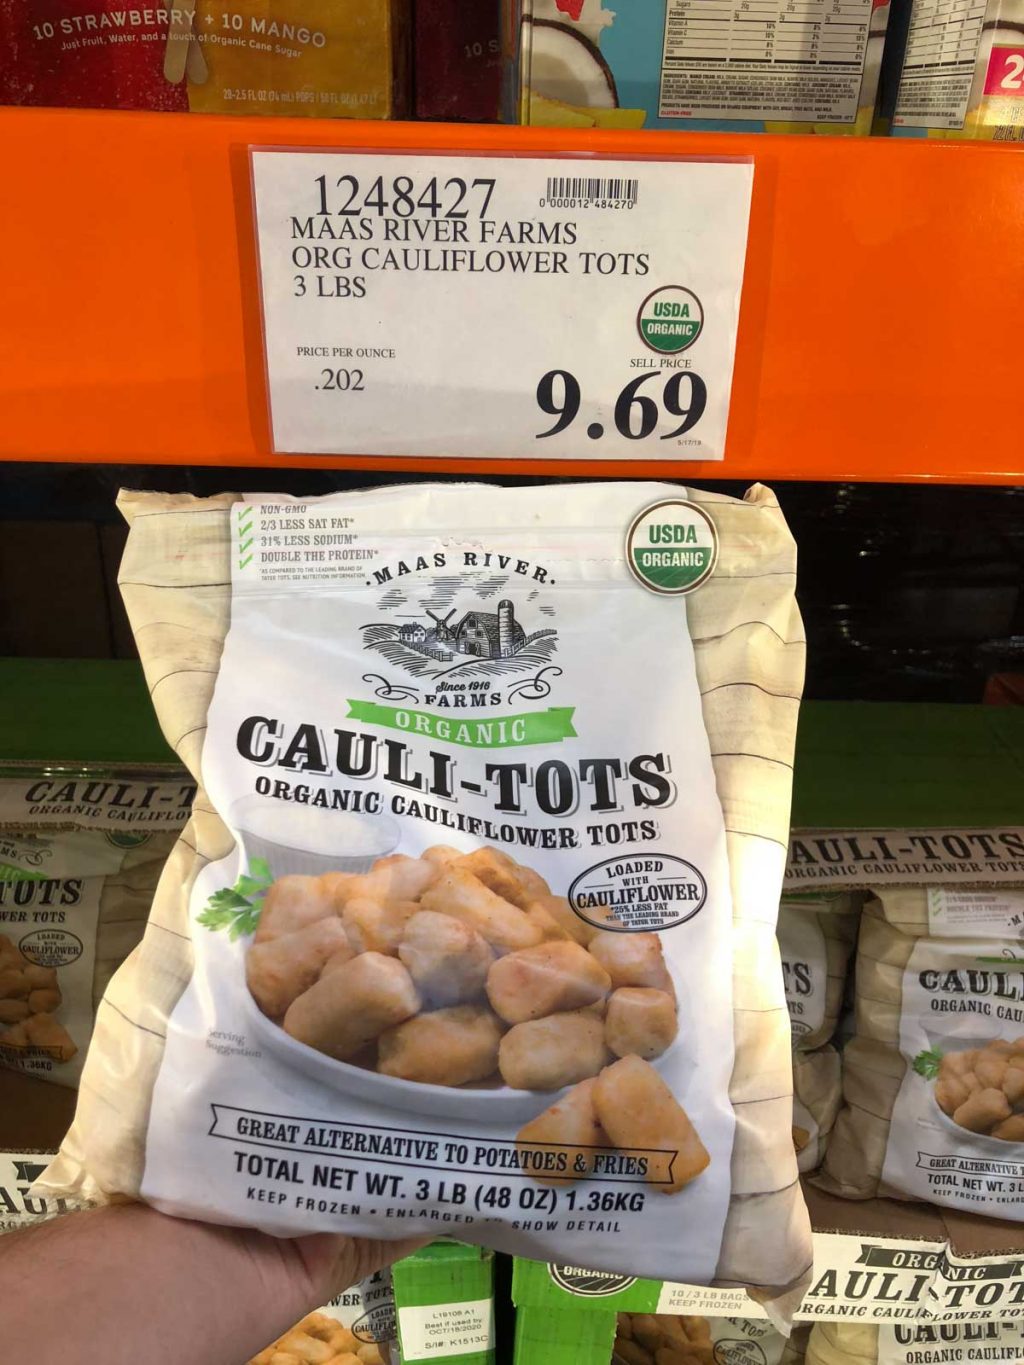 A hand holding a bag of frozen organic vegan cauliflower tots for $9.69 at Costco.